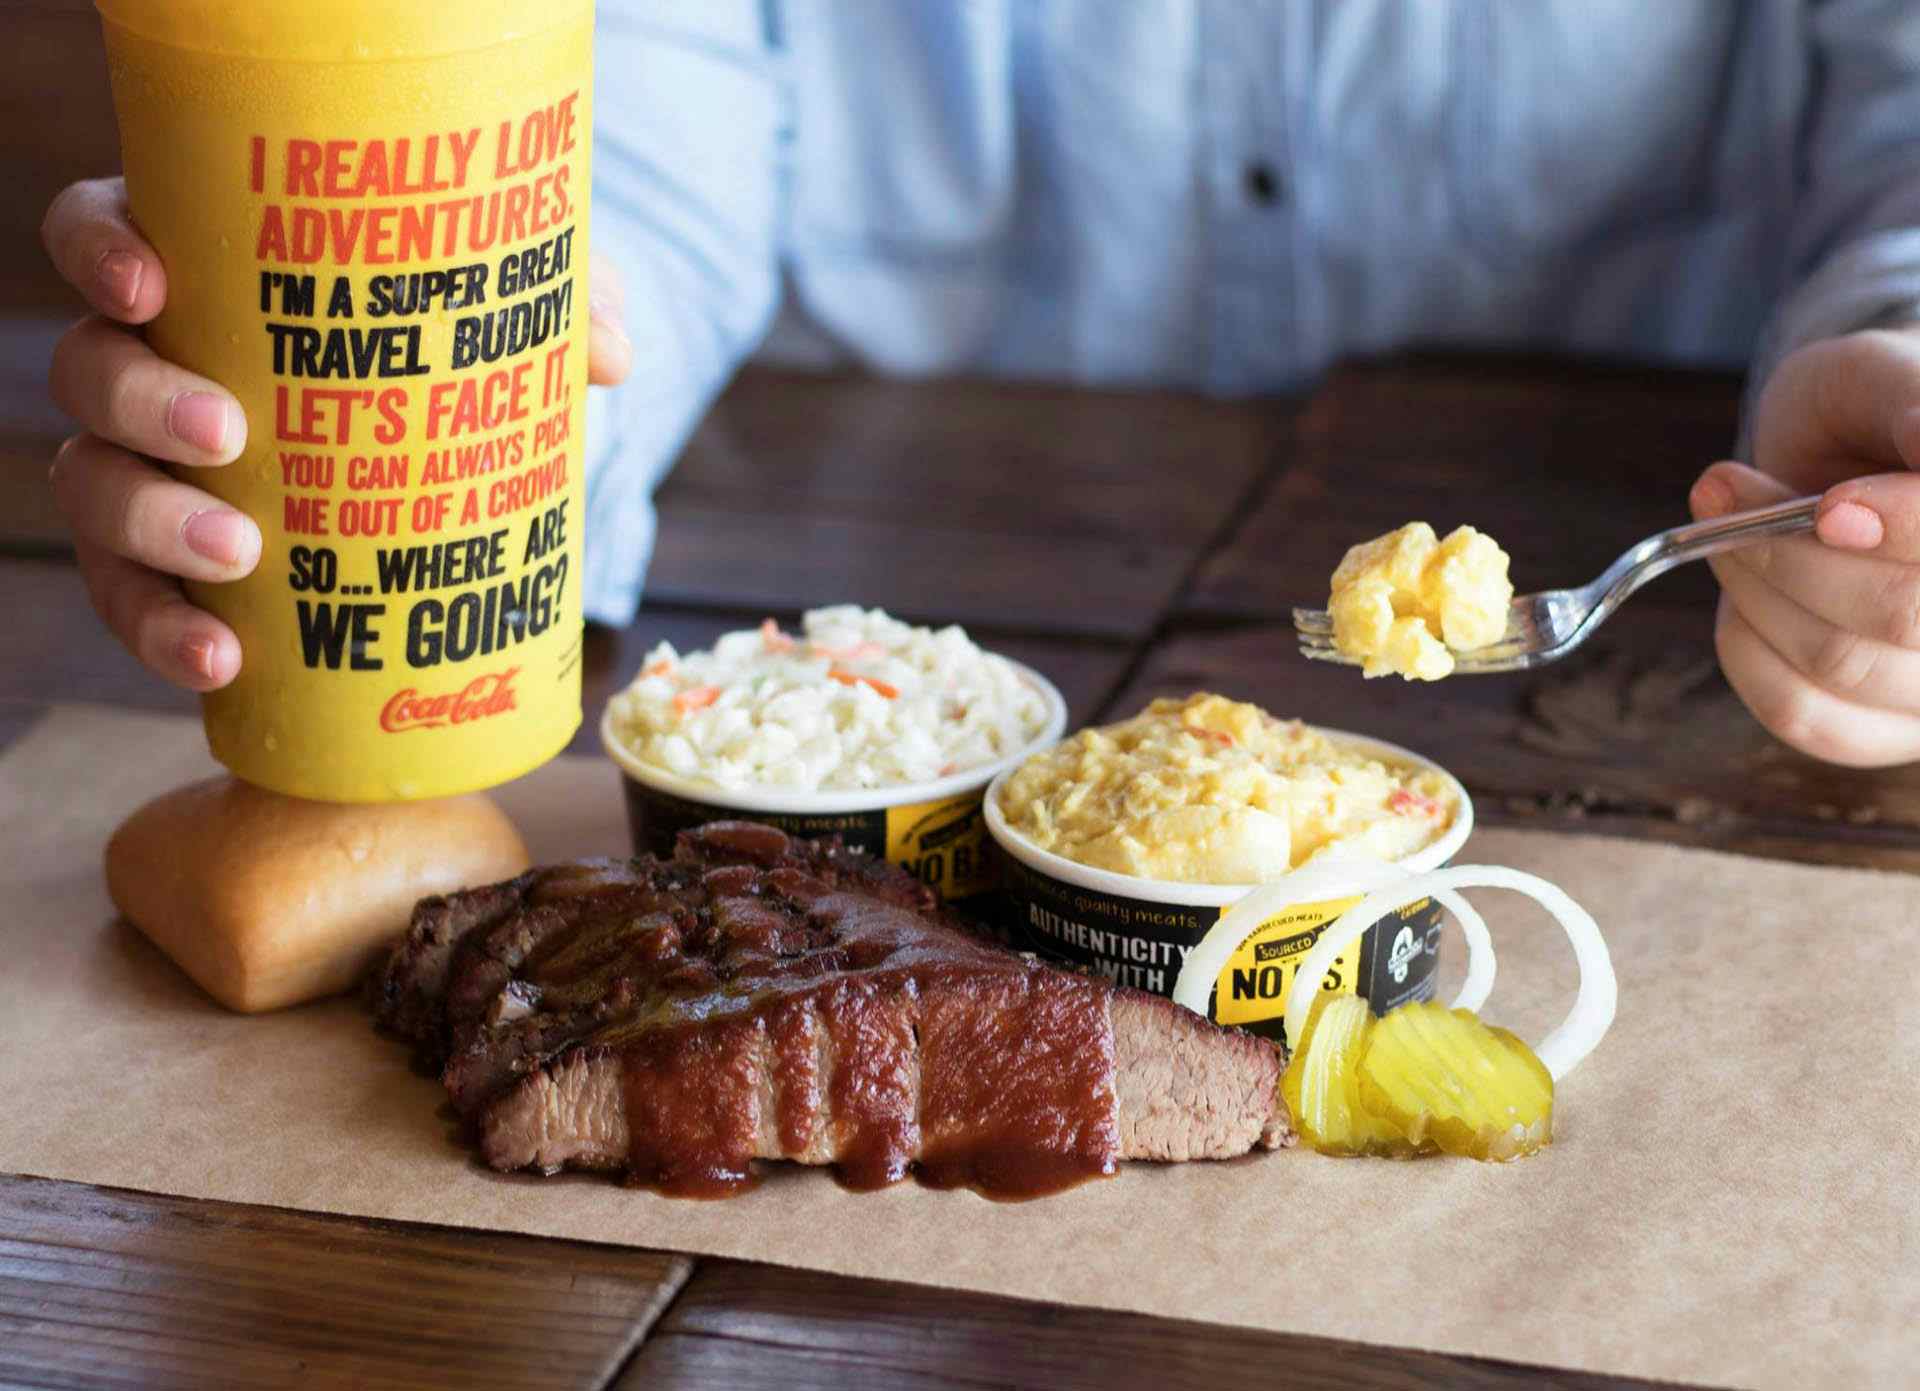 Army Engineer and Brisket Lover Opens Dickey’s Barbecue Pit in Hometown